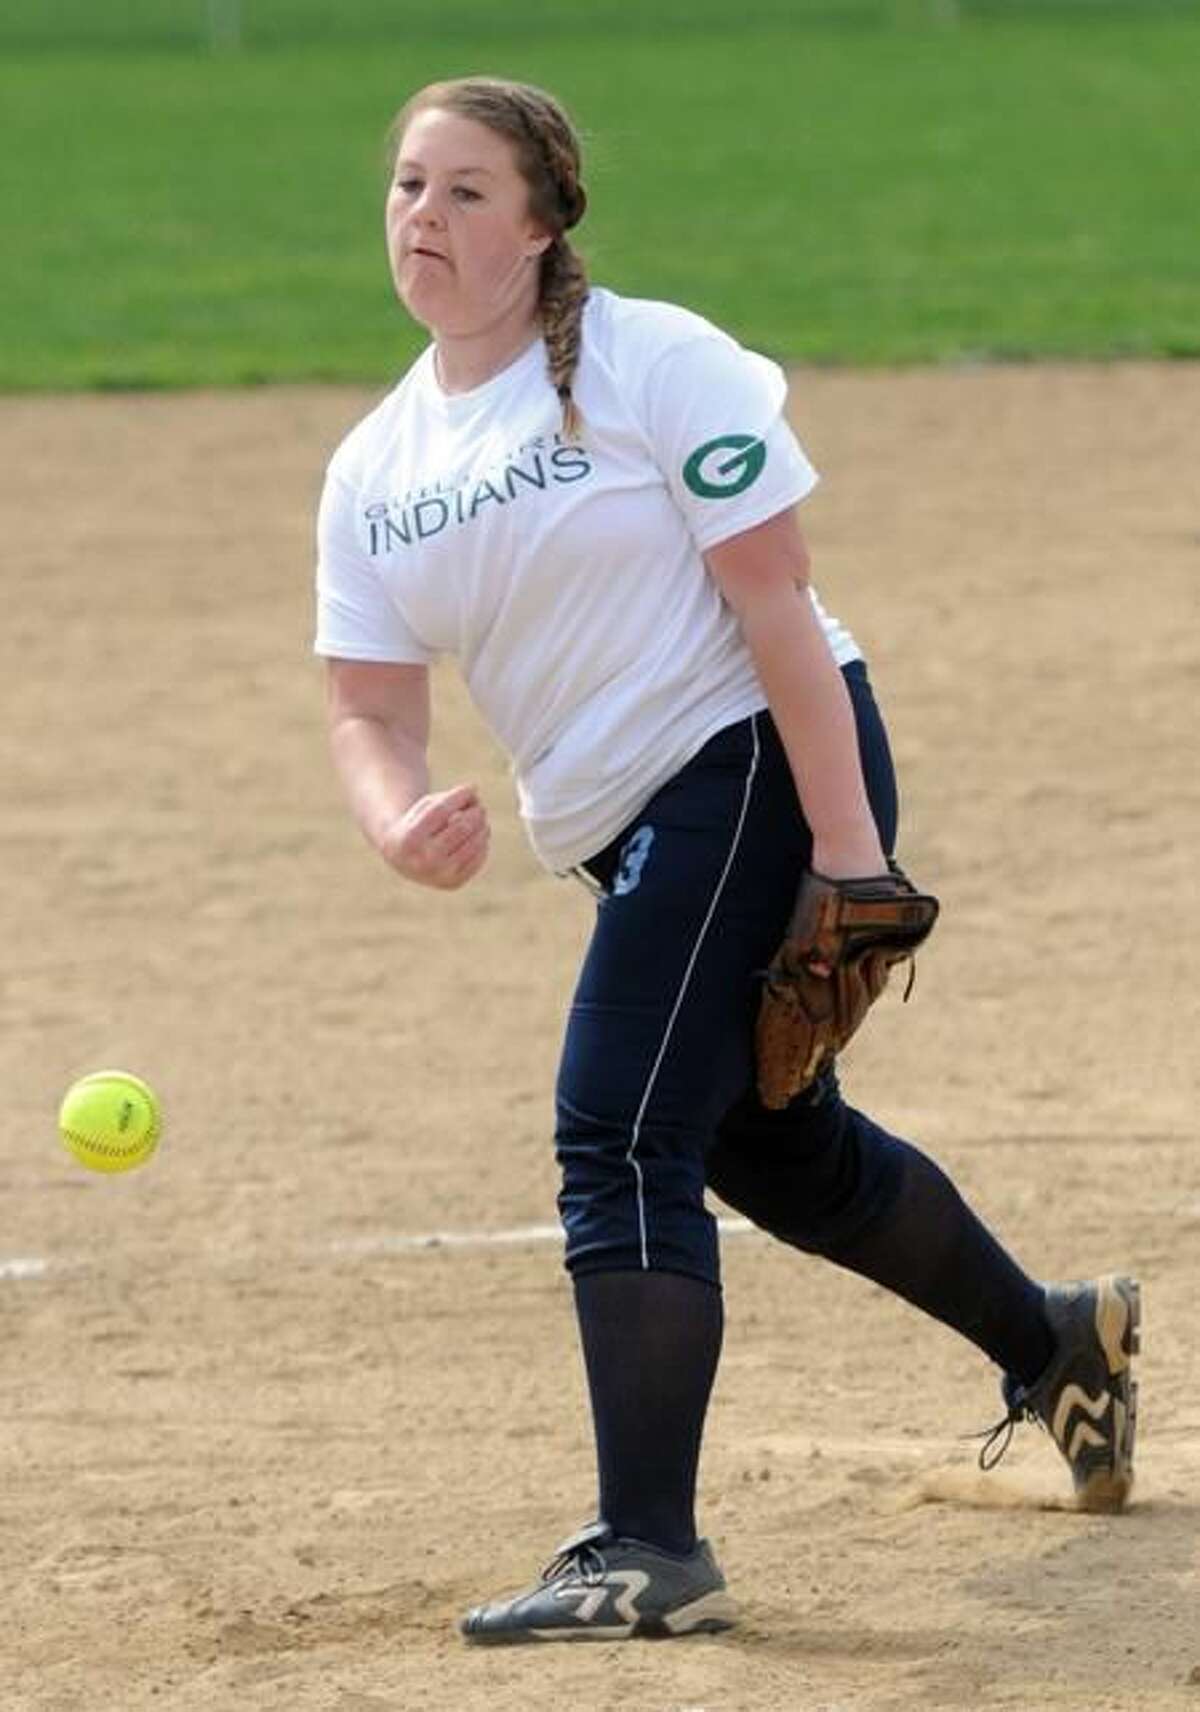 Guilford softball pitcher Leah Torre is one of the top pitchers in the Southern Connecticut Conference. Photo by Peter Hvizdak / New Haven Register